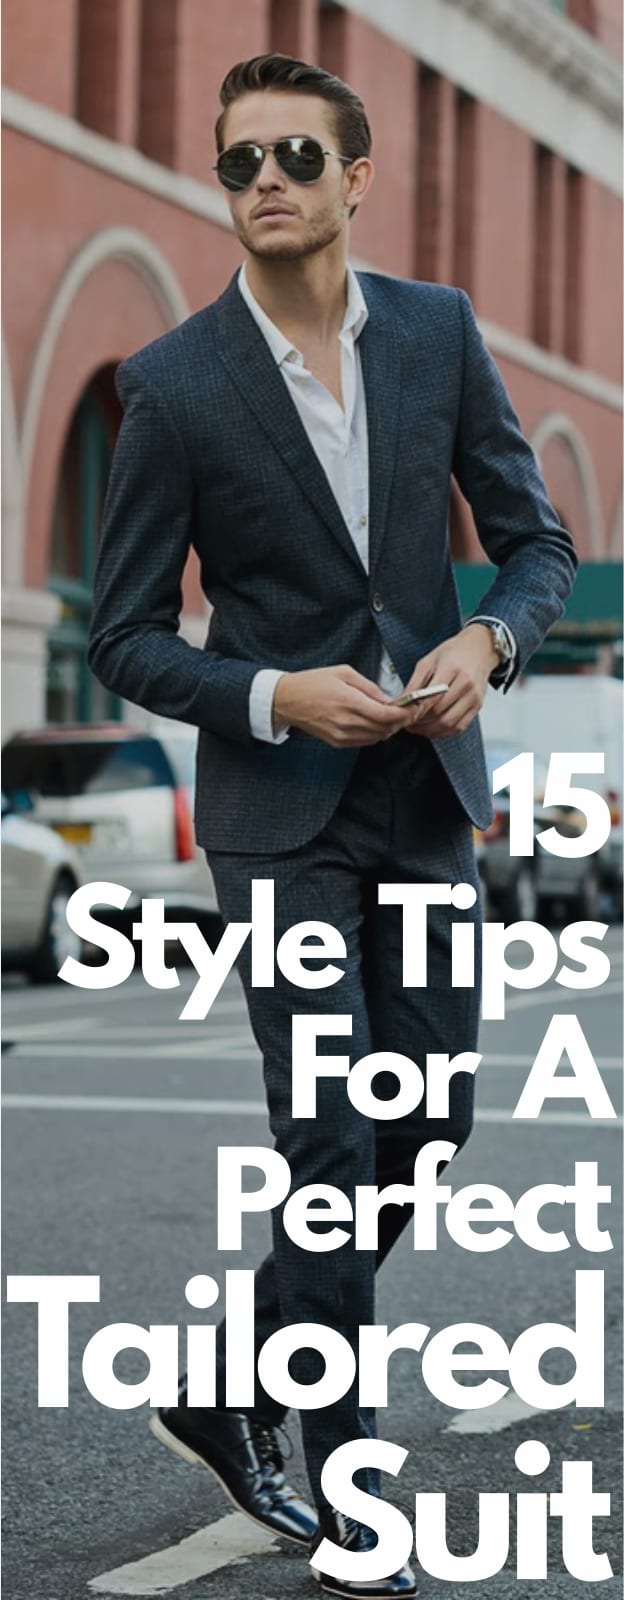 15 Style Tips For A Perfect Tailored Suit